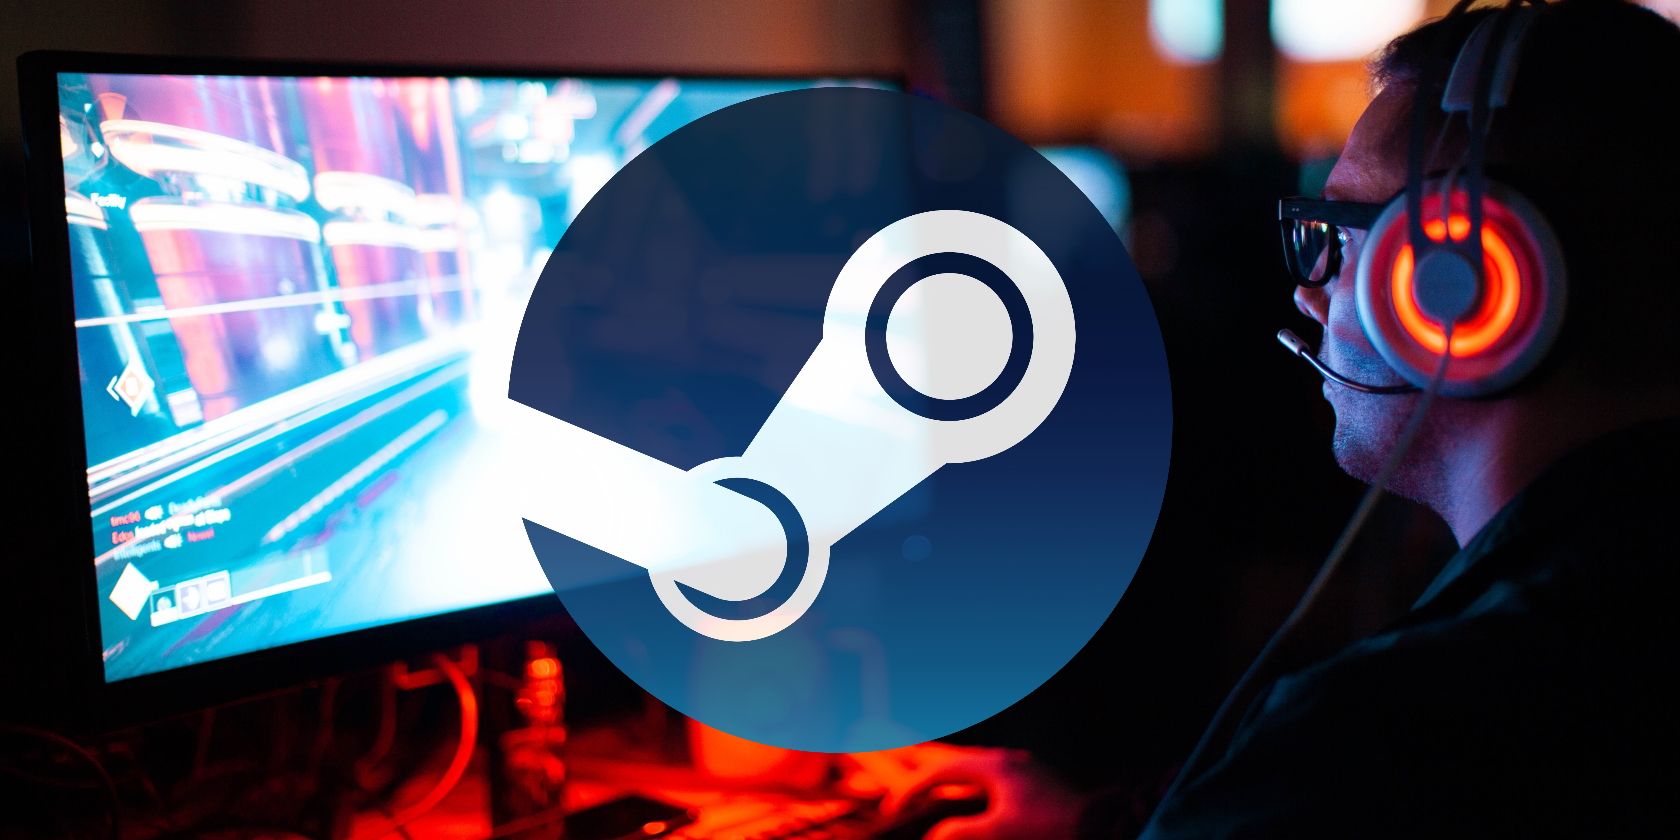 Steam Database — Browser addons — Google Chrome extensions